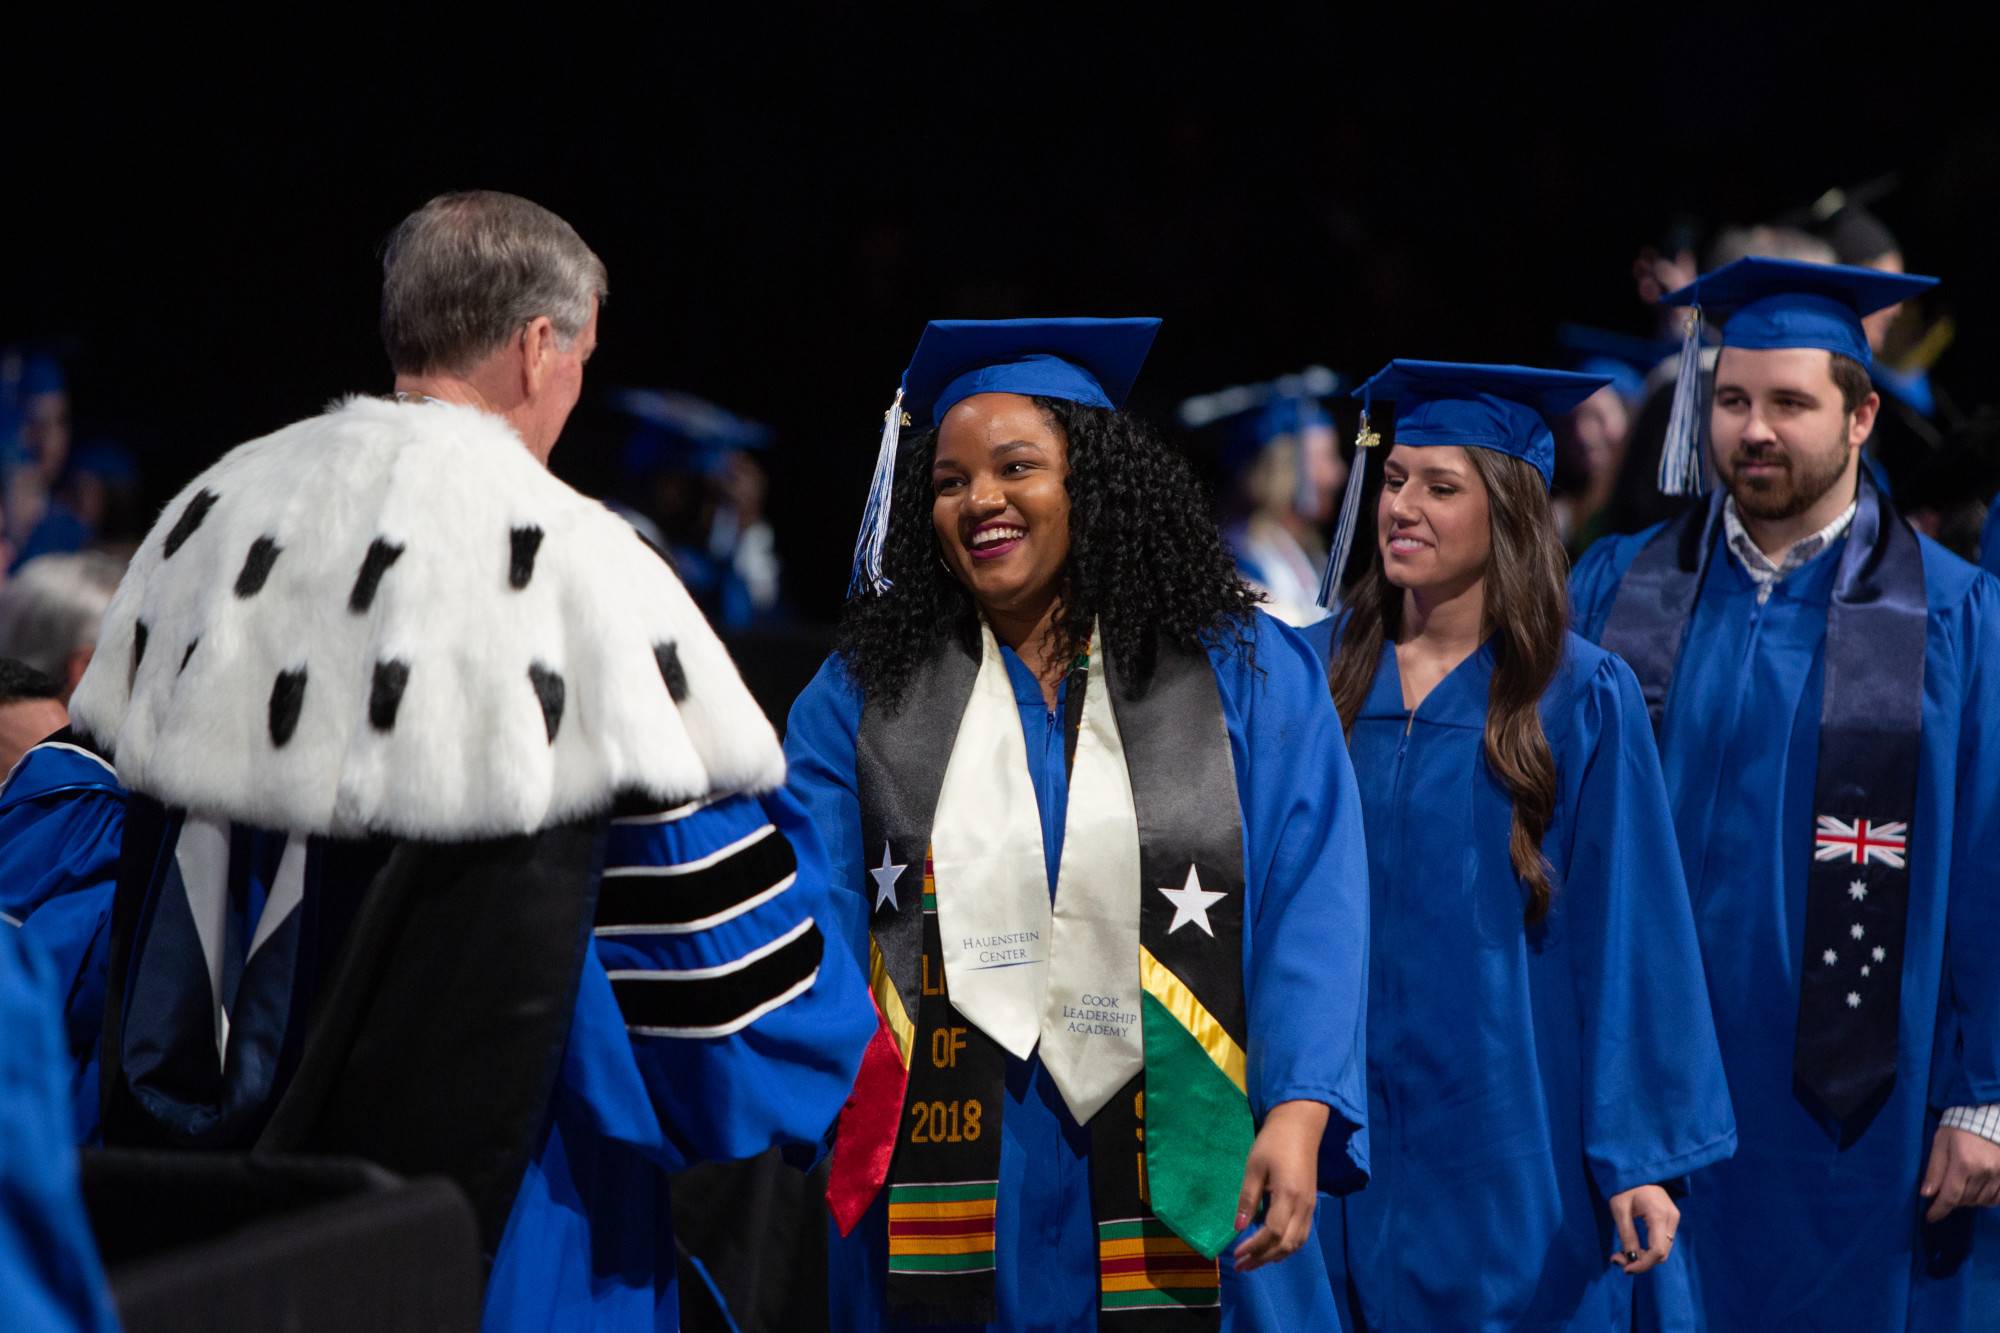 A 2018 grad crosses the stage at Commencement